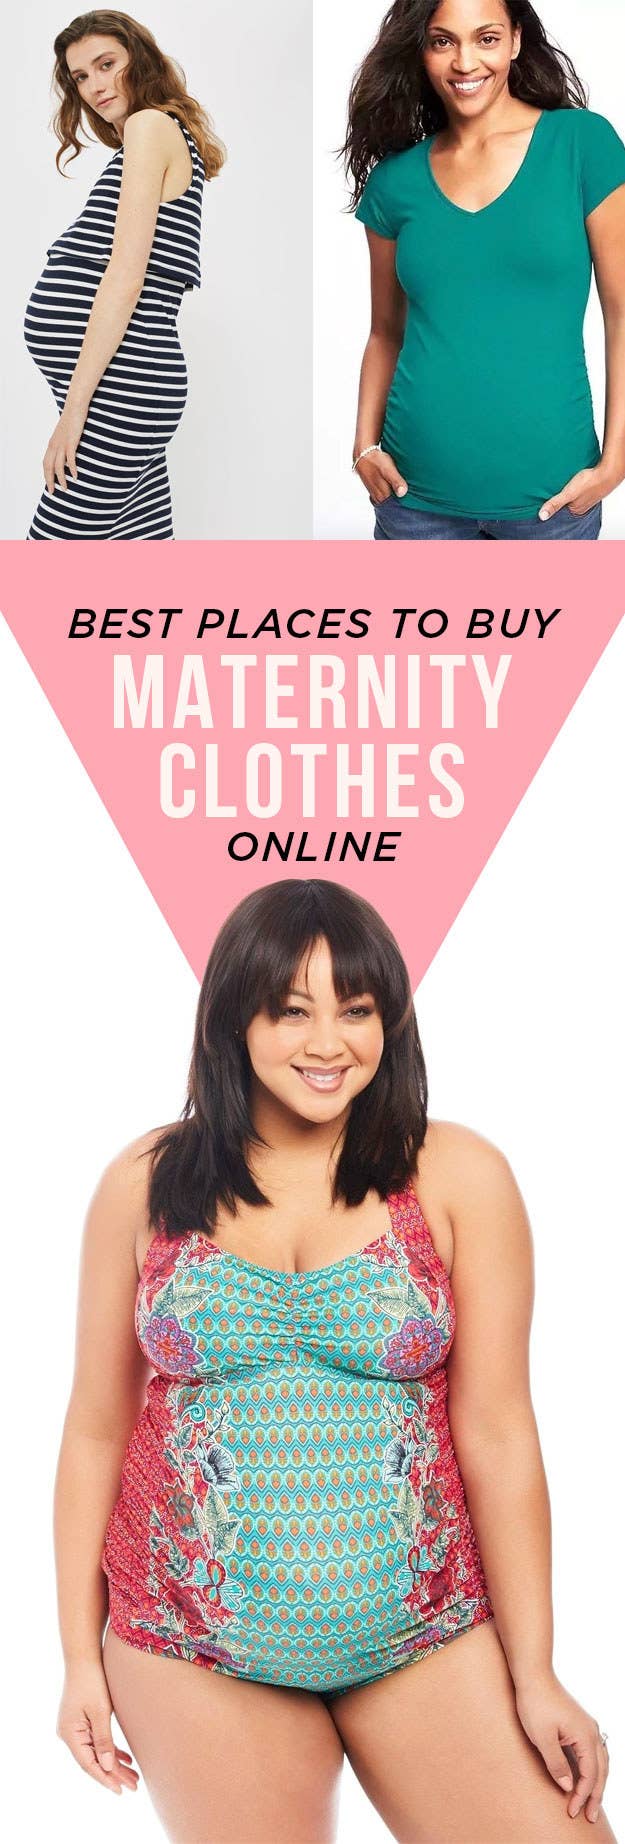 18 Best Stores: Where To Buy Maternity Clothes for Cheap - Baby Doppler Blog